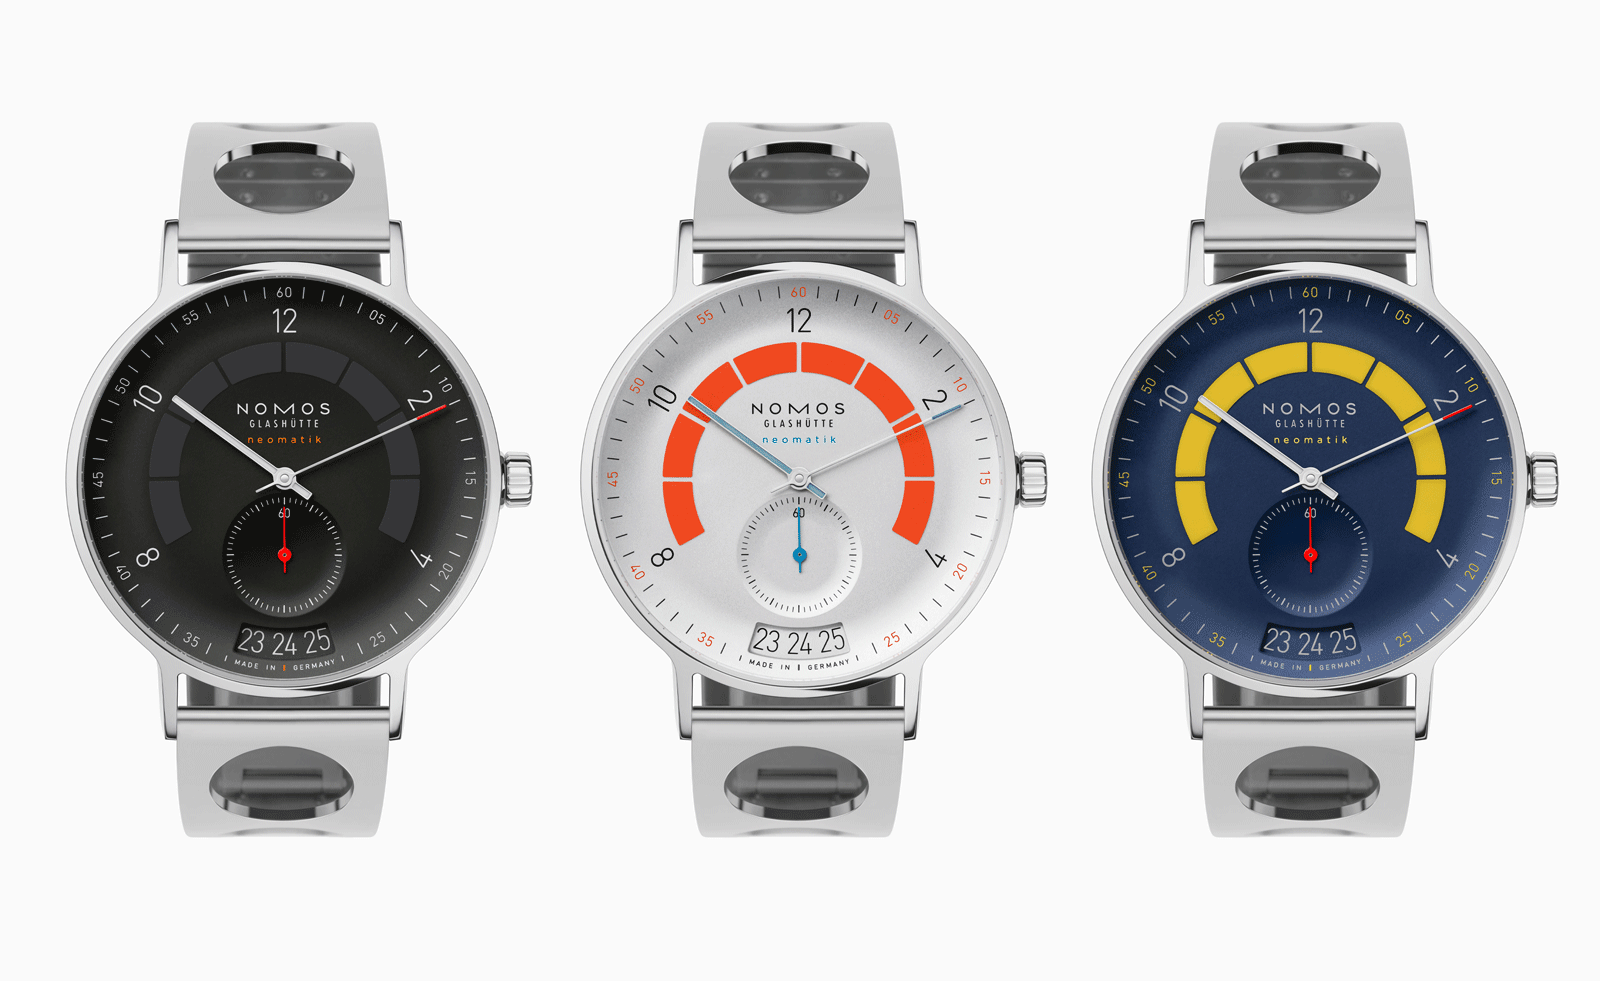 Three nomos watches with different dial patterns